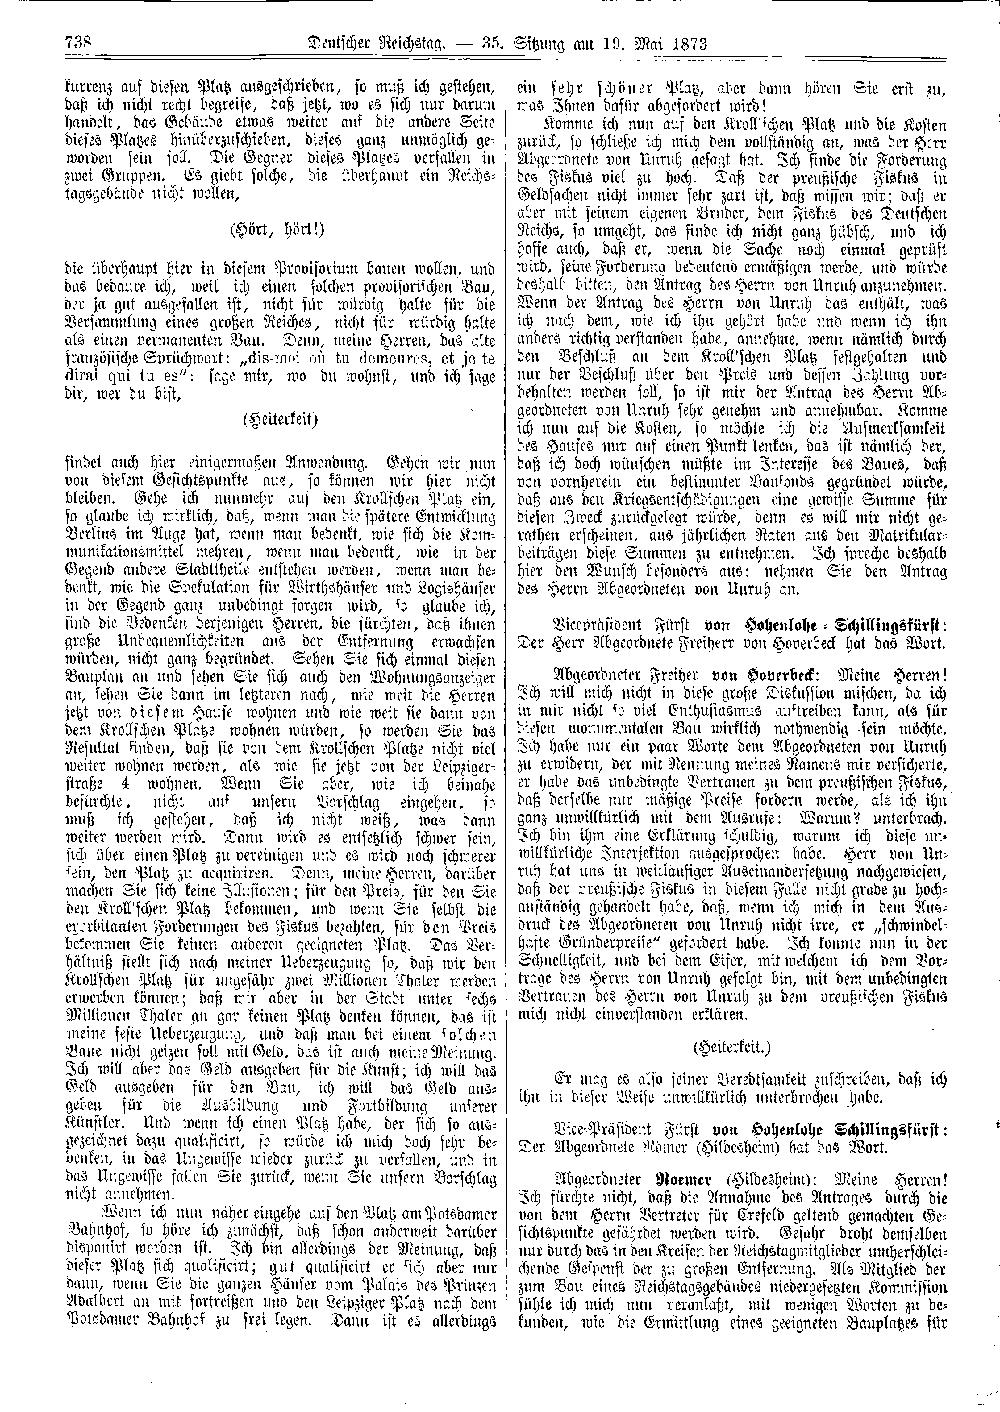 Scan of page 738